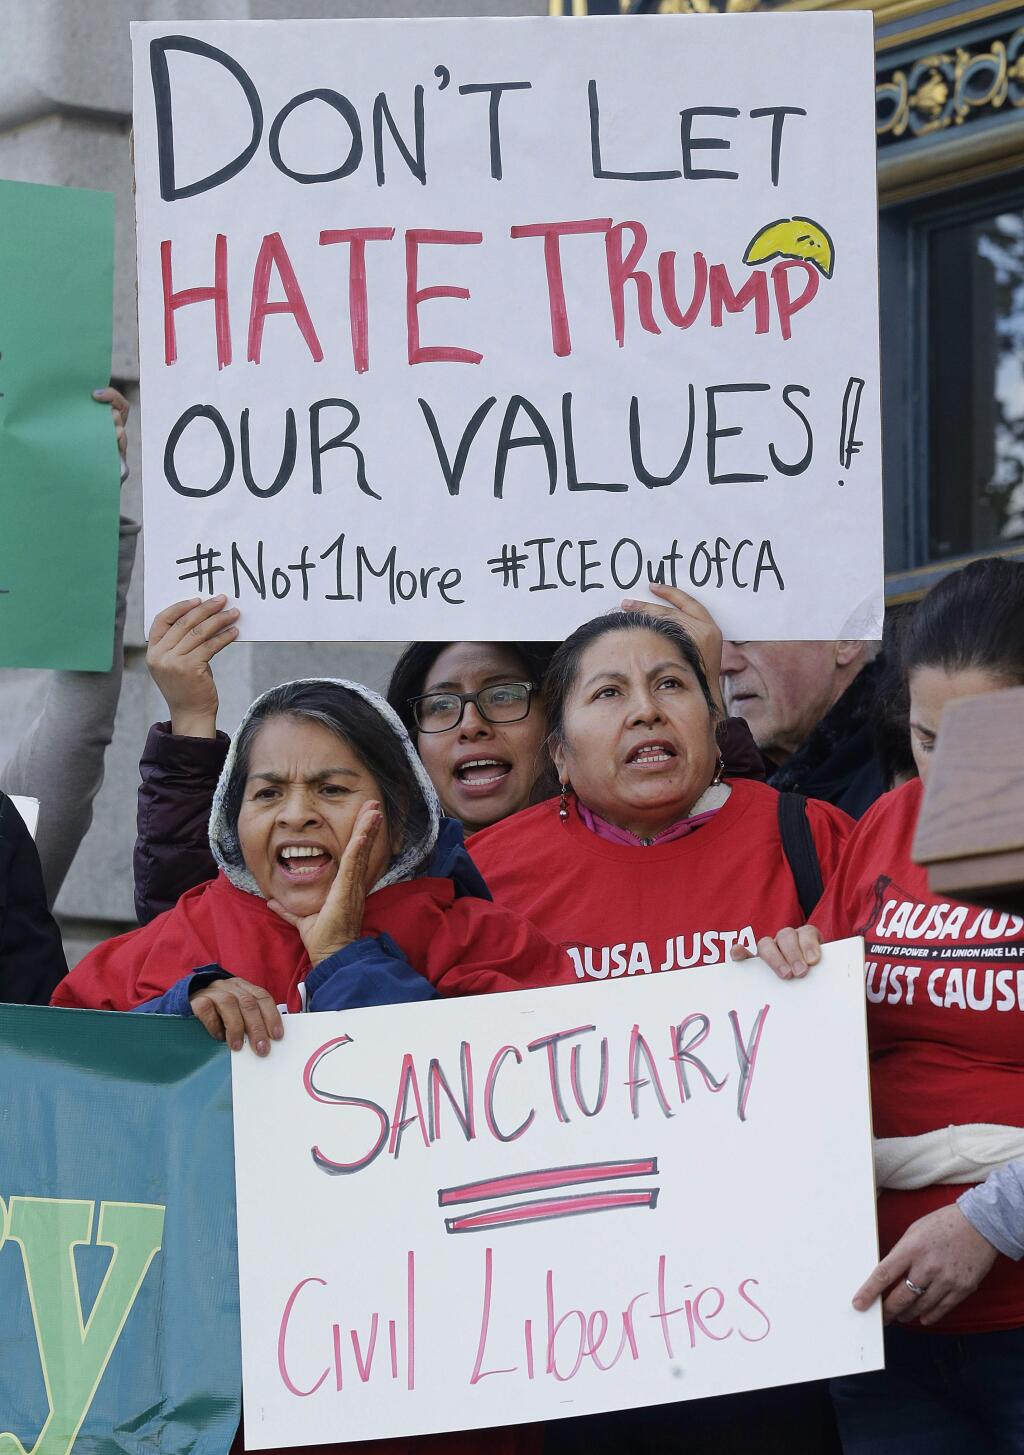 FILE - In this Jan. 25, 2017 file photo, protesters hold signs as they yell at a rally outside of City Hall in San Francisco. Immigration is one of the major issues between the California gubernatorial candidates in the election Tuesday, Nov. 6, 2018, for California governor. Republican candidate John Cox is opposed to California's 'sanctuary state' legislation, while Democratic candidate Gavin Newsom supports it and wants comprehensive immigration reform at the federal level and opposes building a wall on the U.S.-Mexico border. (AP Photo/Jeff Chiu, File)